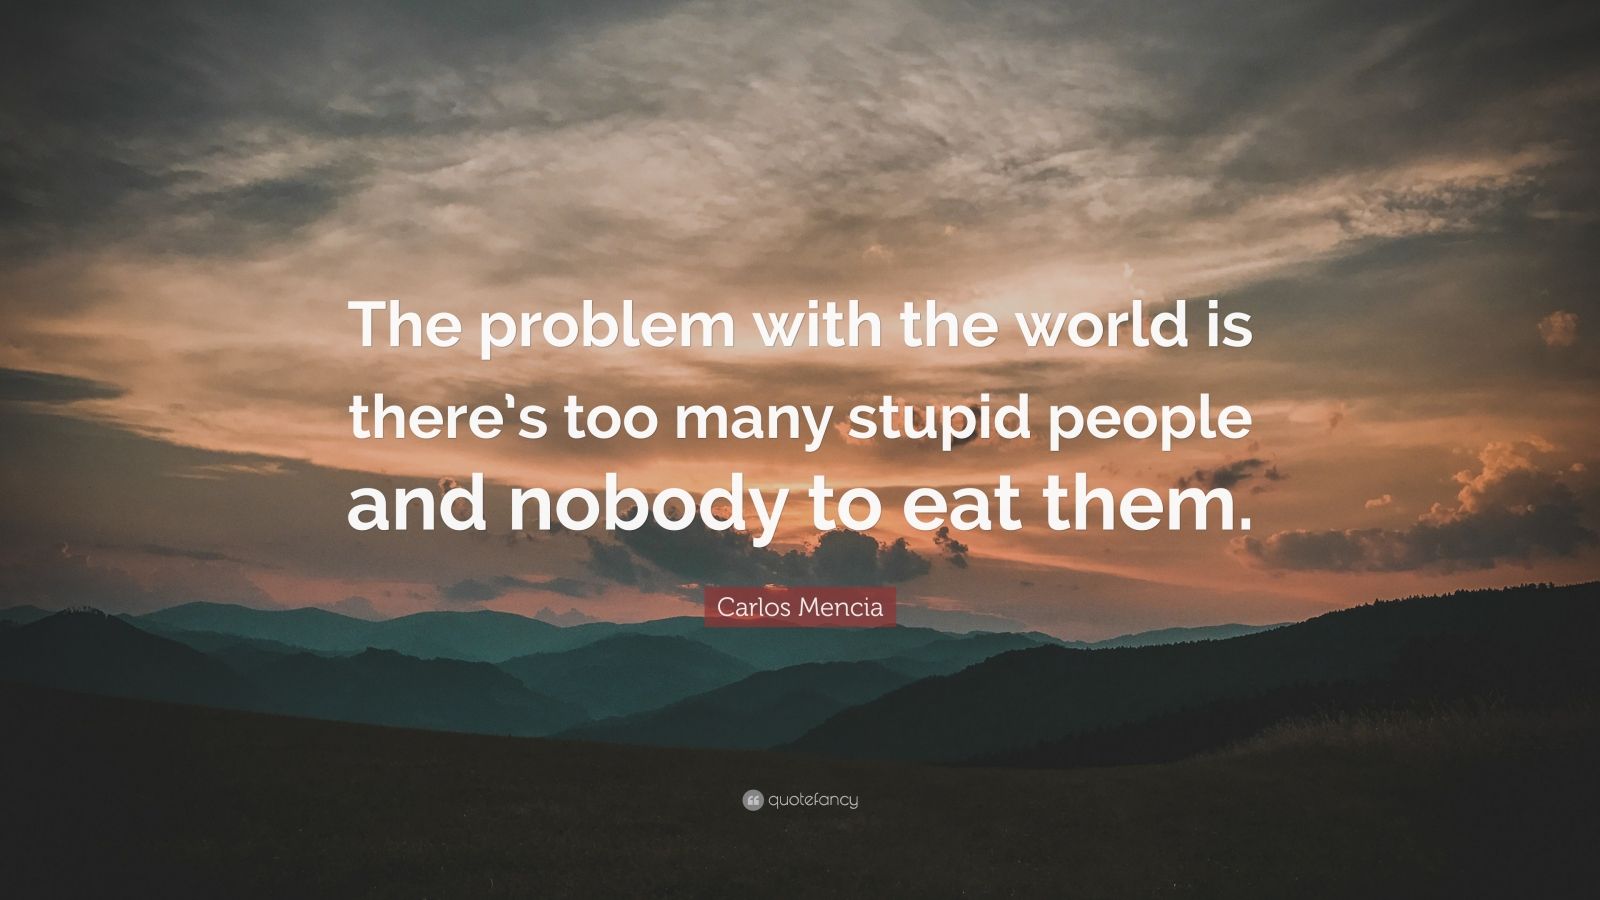 Carlos Mencia Quote: “The problem with the world is there’s too many